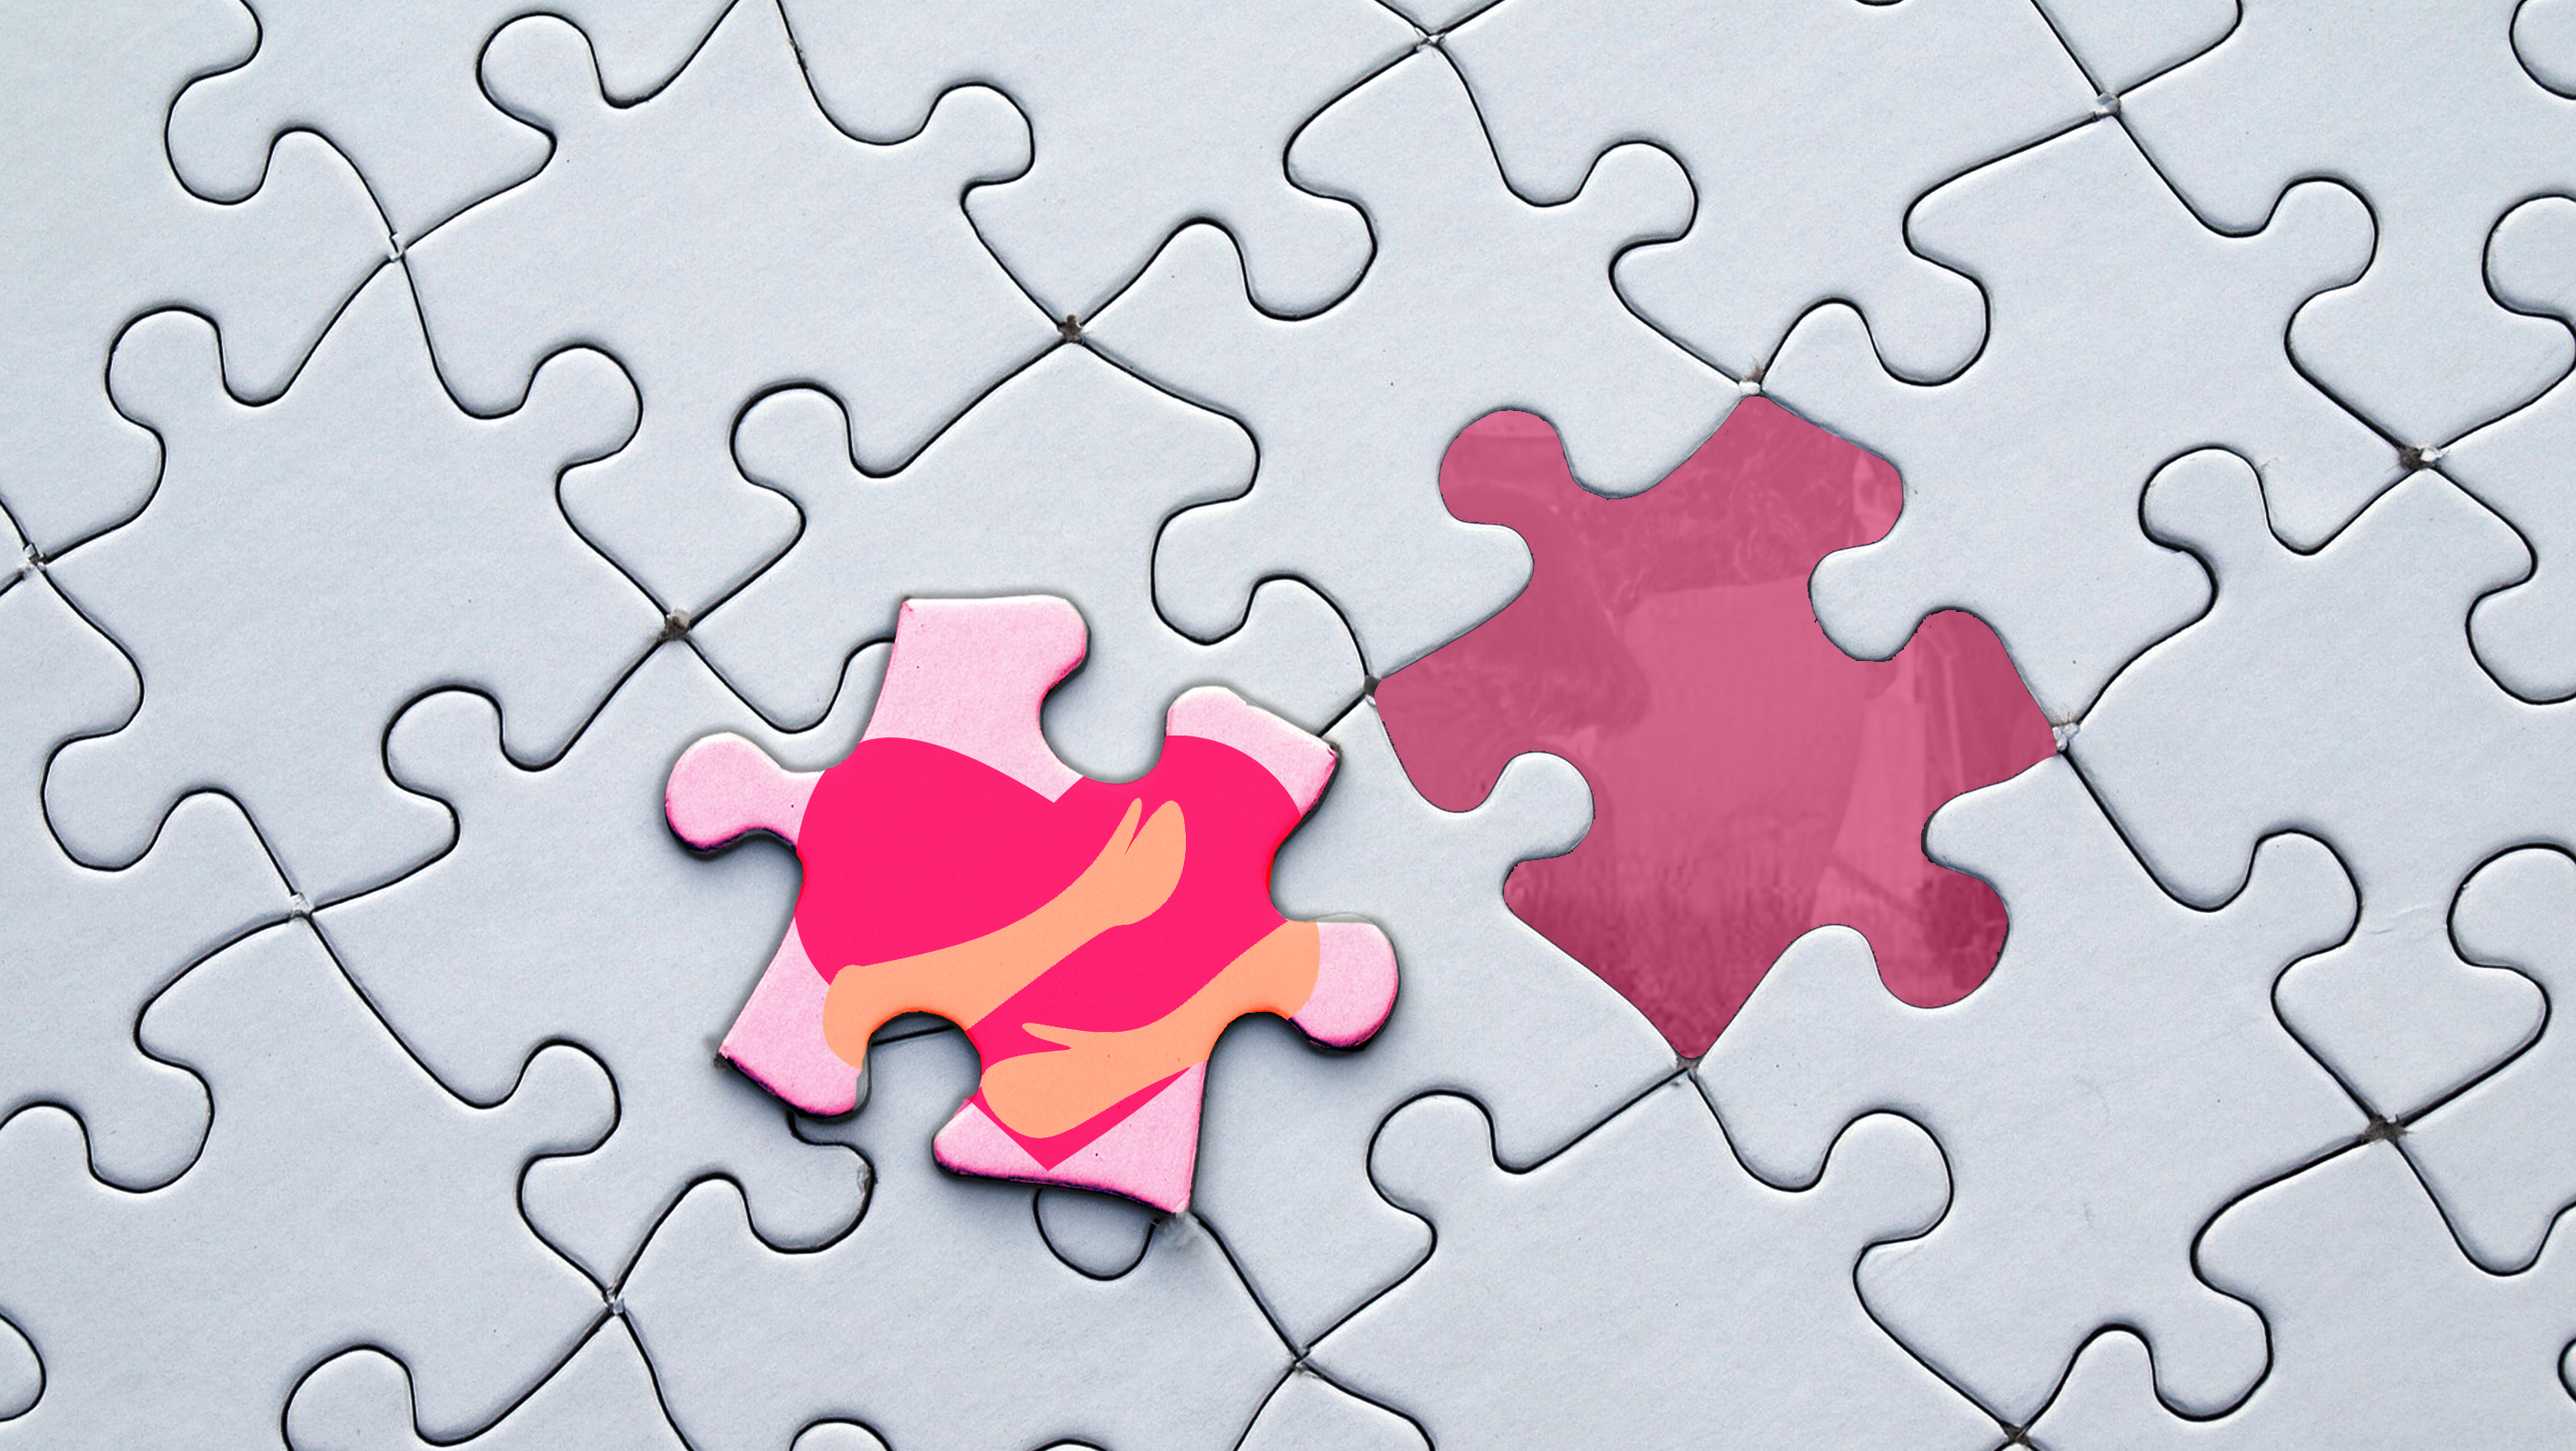 A puzzle with one missing piece. The remaining piece is pink with a red heart and two hands.